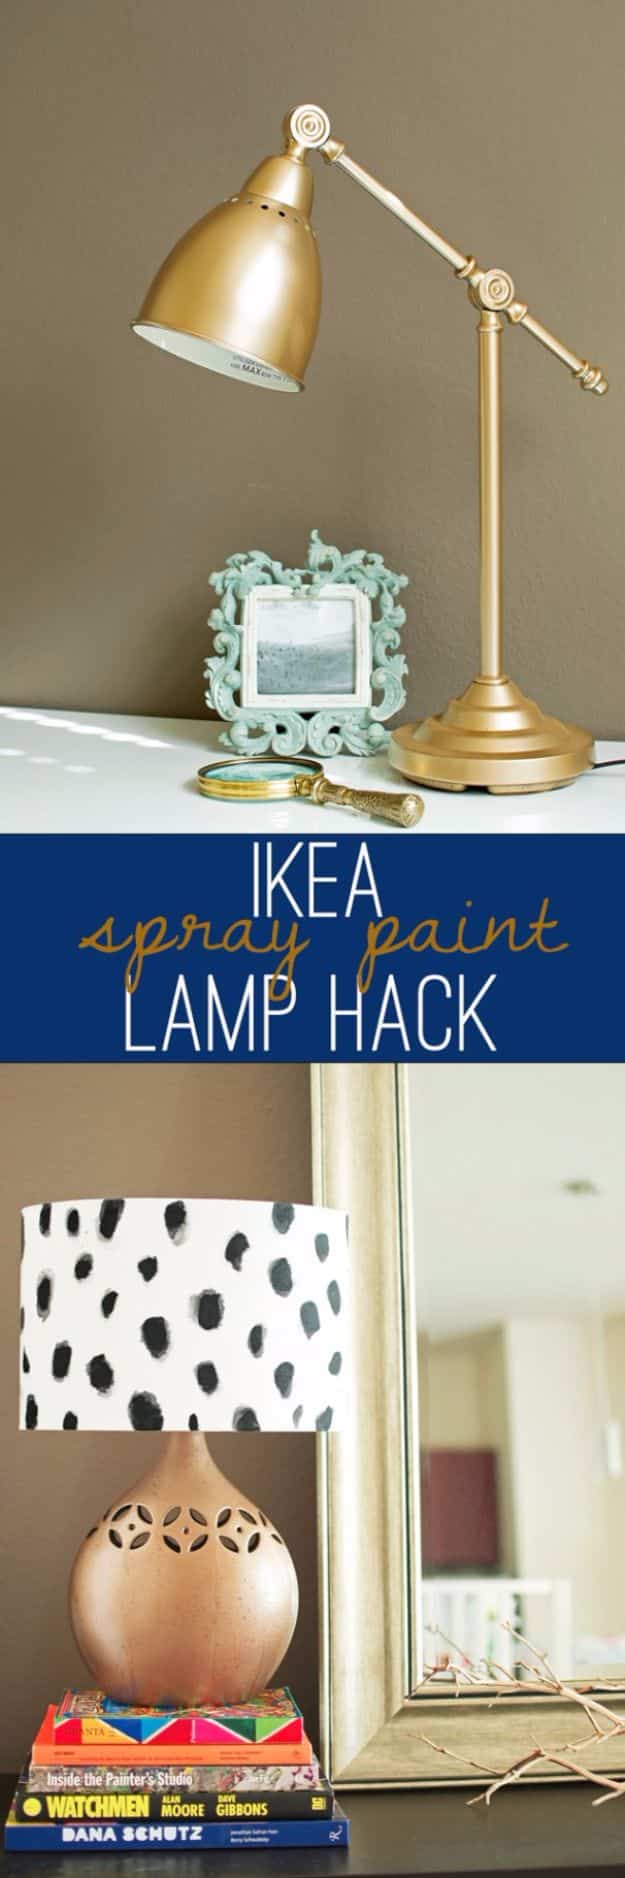 IKEA Hacks For The Bedroom - DIY Spotted Copper Lamp - Best IKEA Furniture Hack Ideas for Bed, Storage, Nightstand, Closet System and Storage, Dresser, Vanity, Wall Art and Kids Rooms - Easy and Cheap DIY Projects for Affordable Room and Home Decor #ikeahacks #diydecor #bedroomdecor